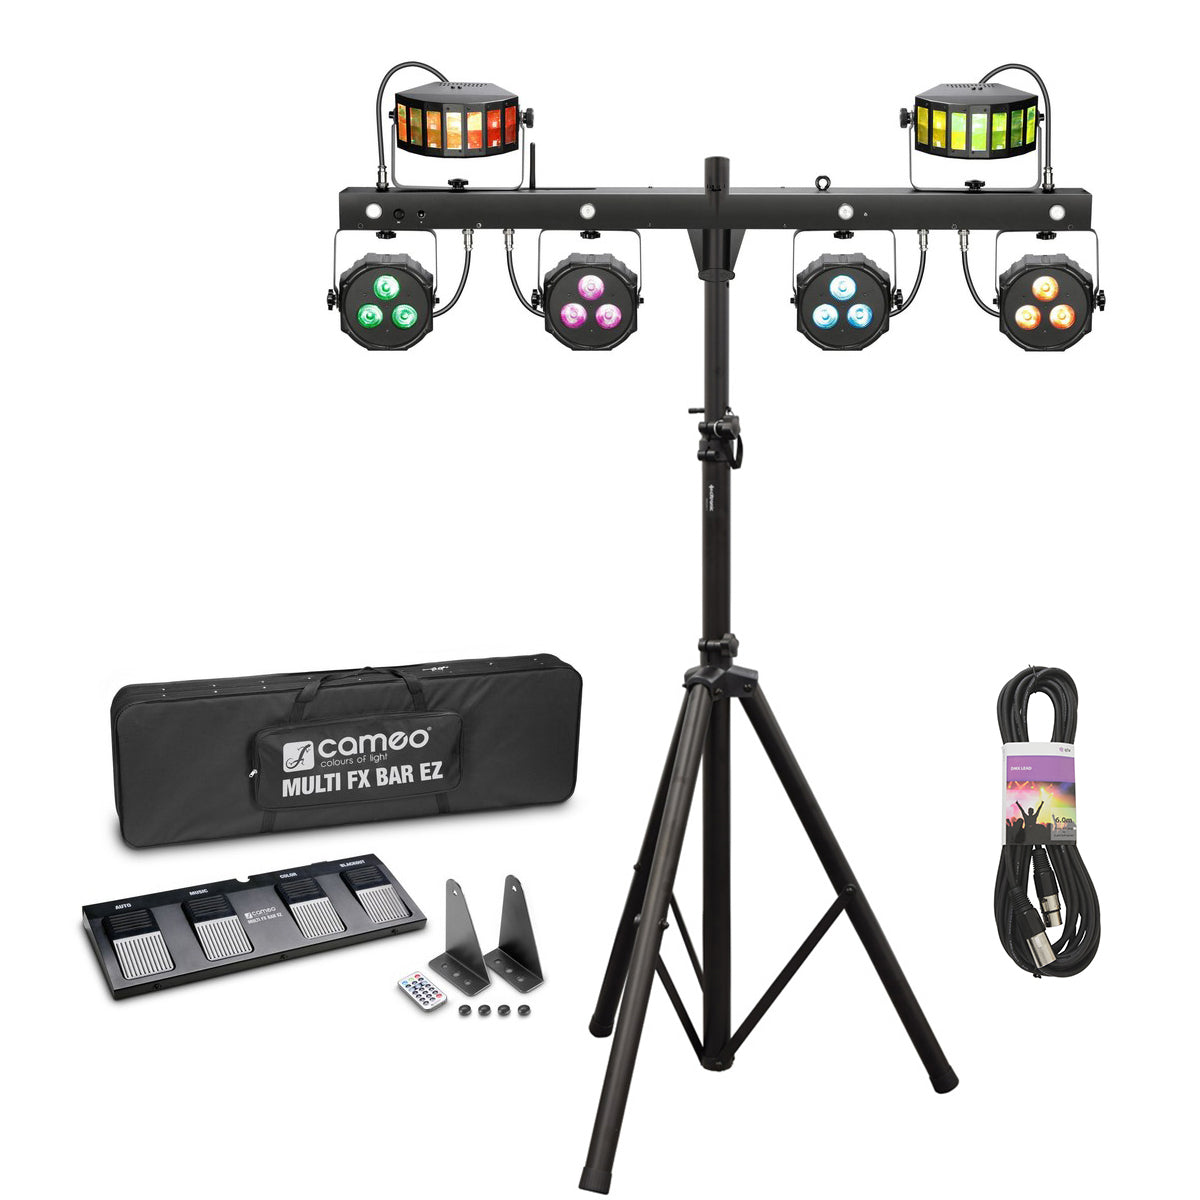 Cameo Multi FX Bar EZ Lighting System with Stand